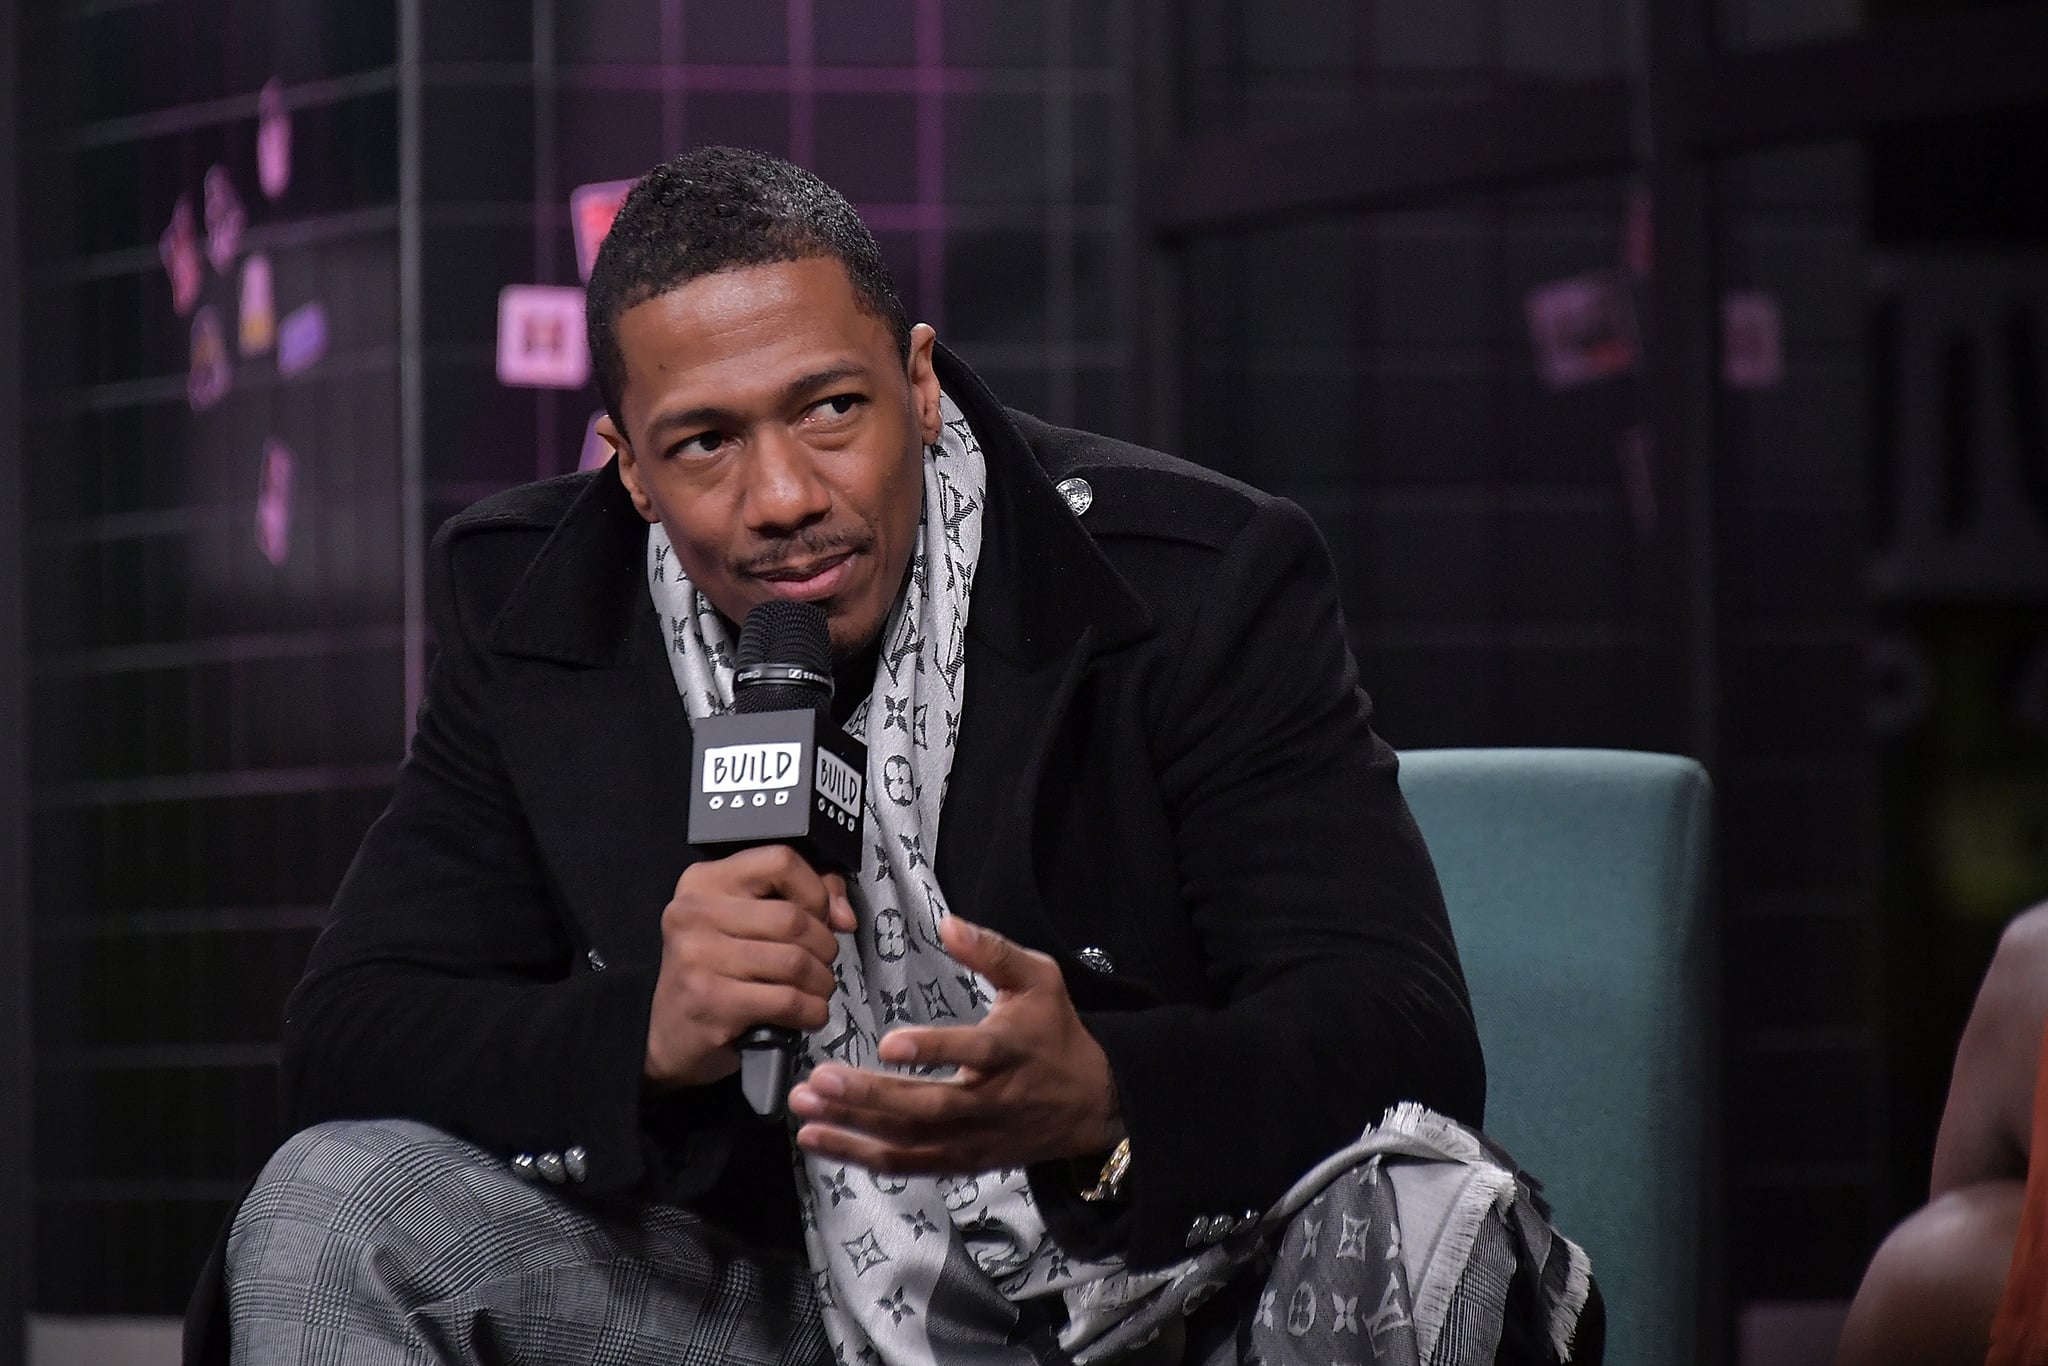 NEW YORK, NY - DECEMBER 11:  Actor and comedian Nick Cannon visits Build to discuss the reality TV show 